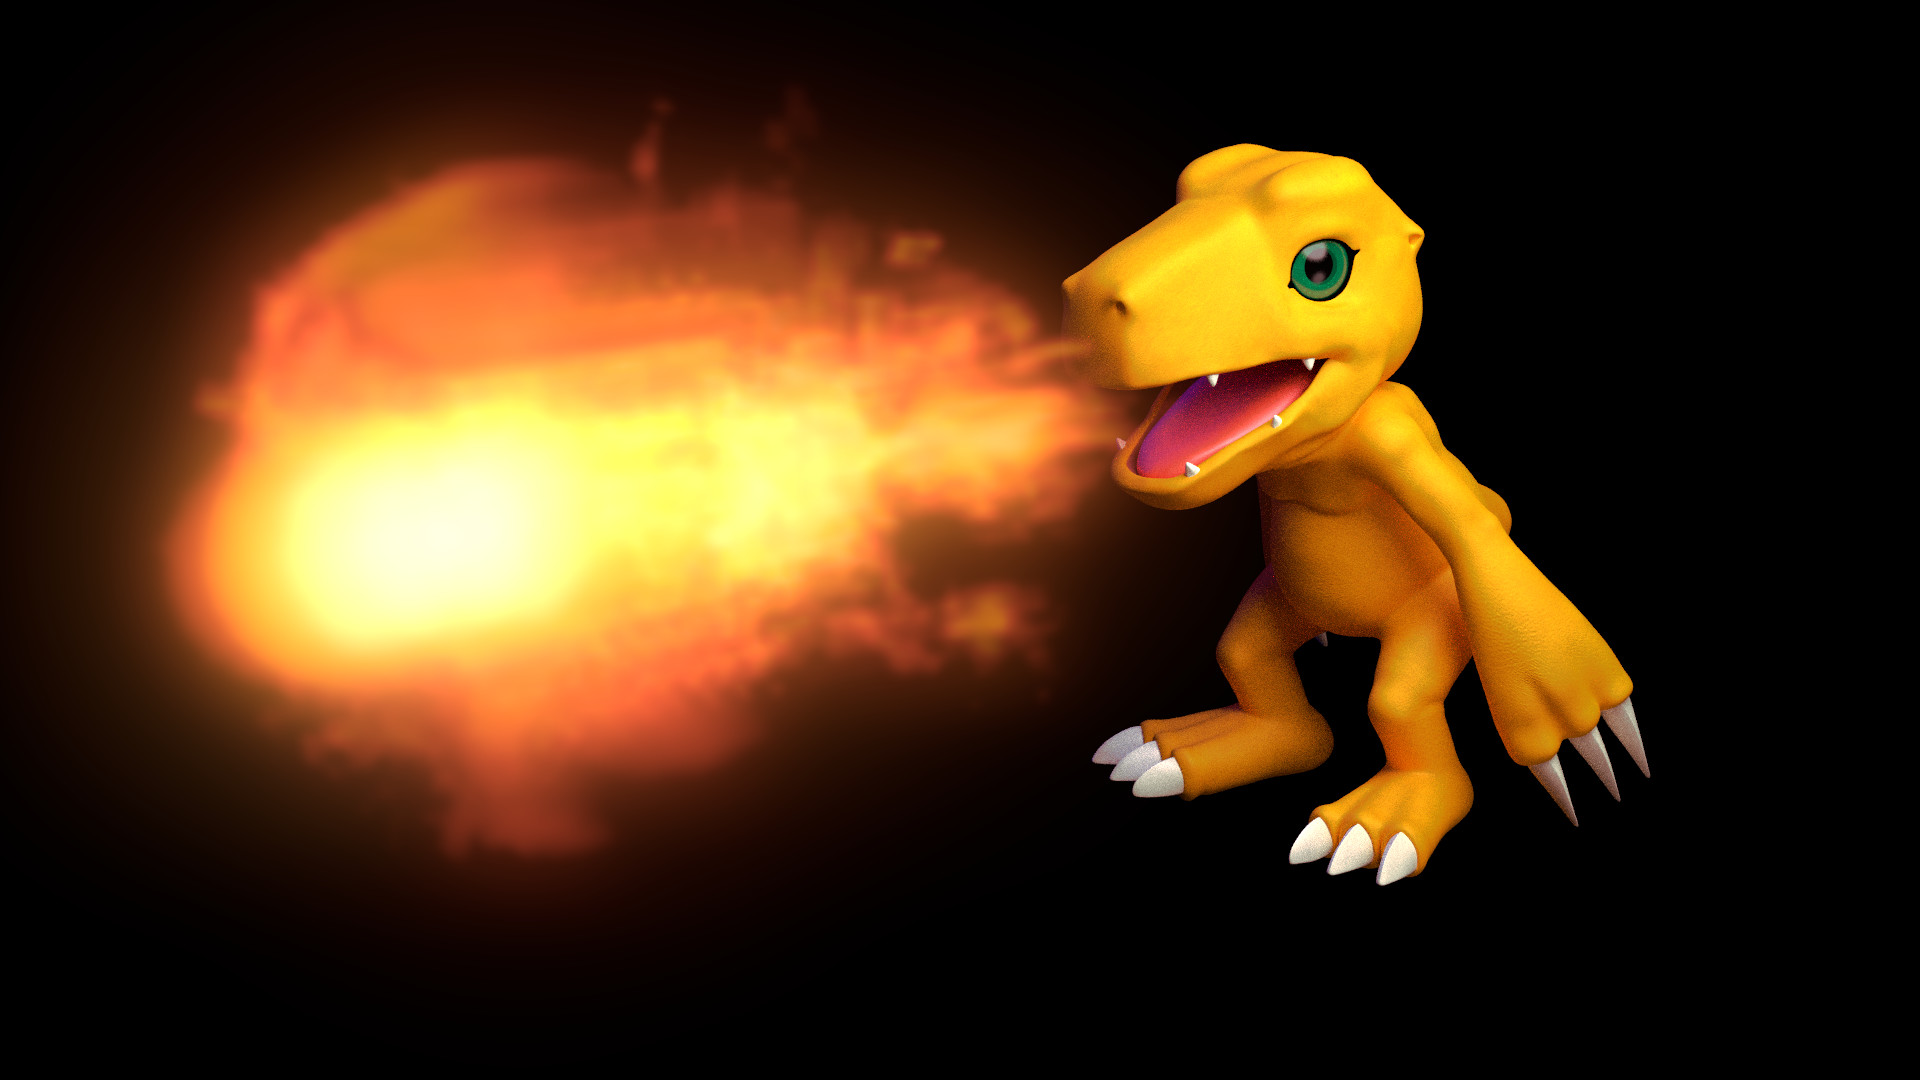 1920x1080 Agumon is the digivolution of Koromon. Most of the design workflow is  comparable to Koromon and Botamon, but Agumon requires better modeling  skills.